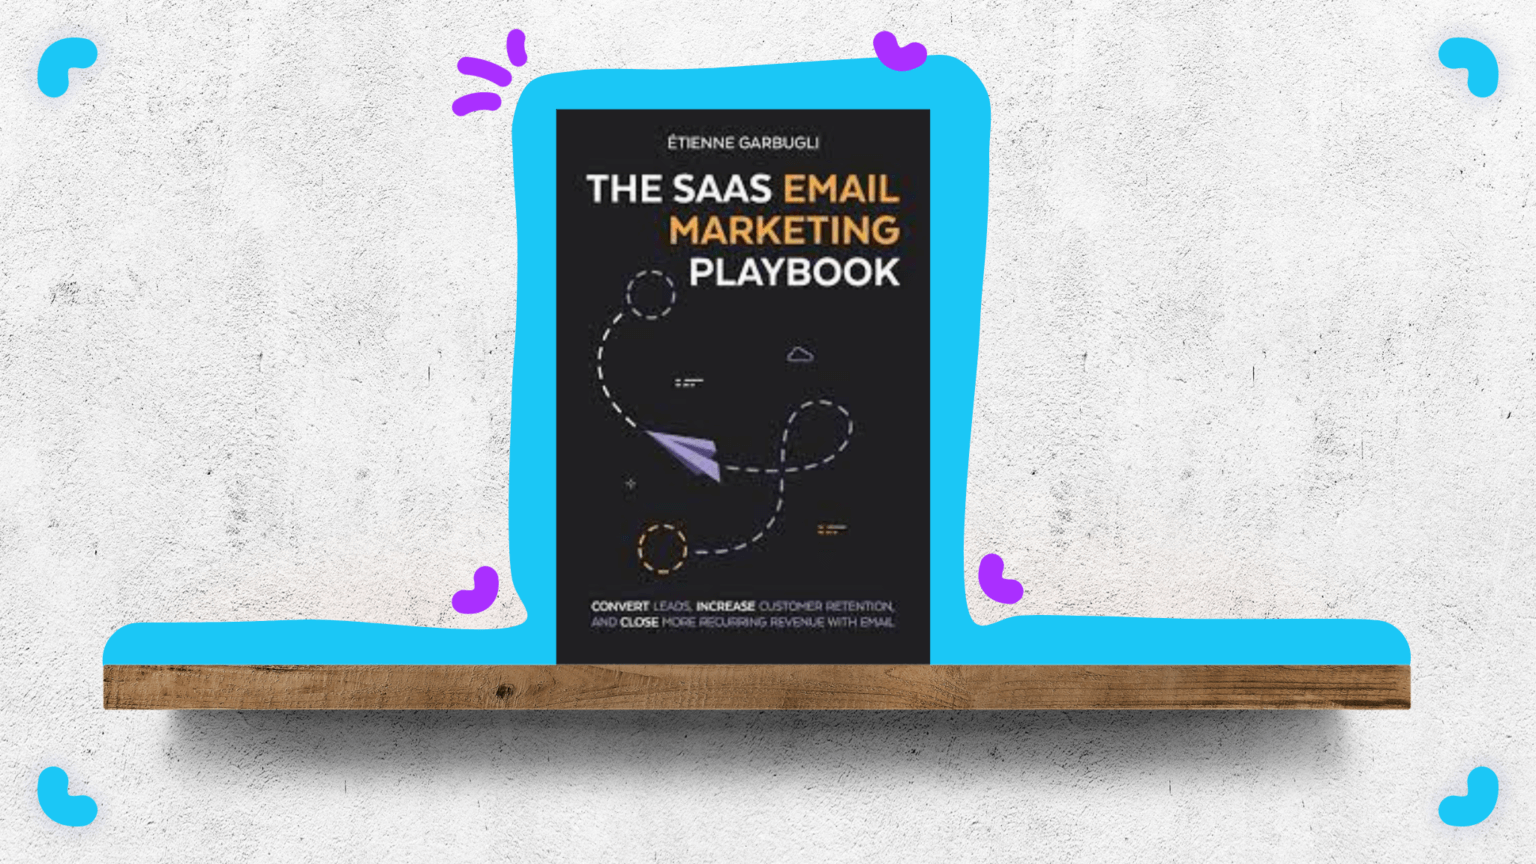 The SaaS email marketing playbook book